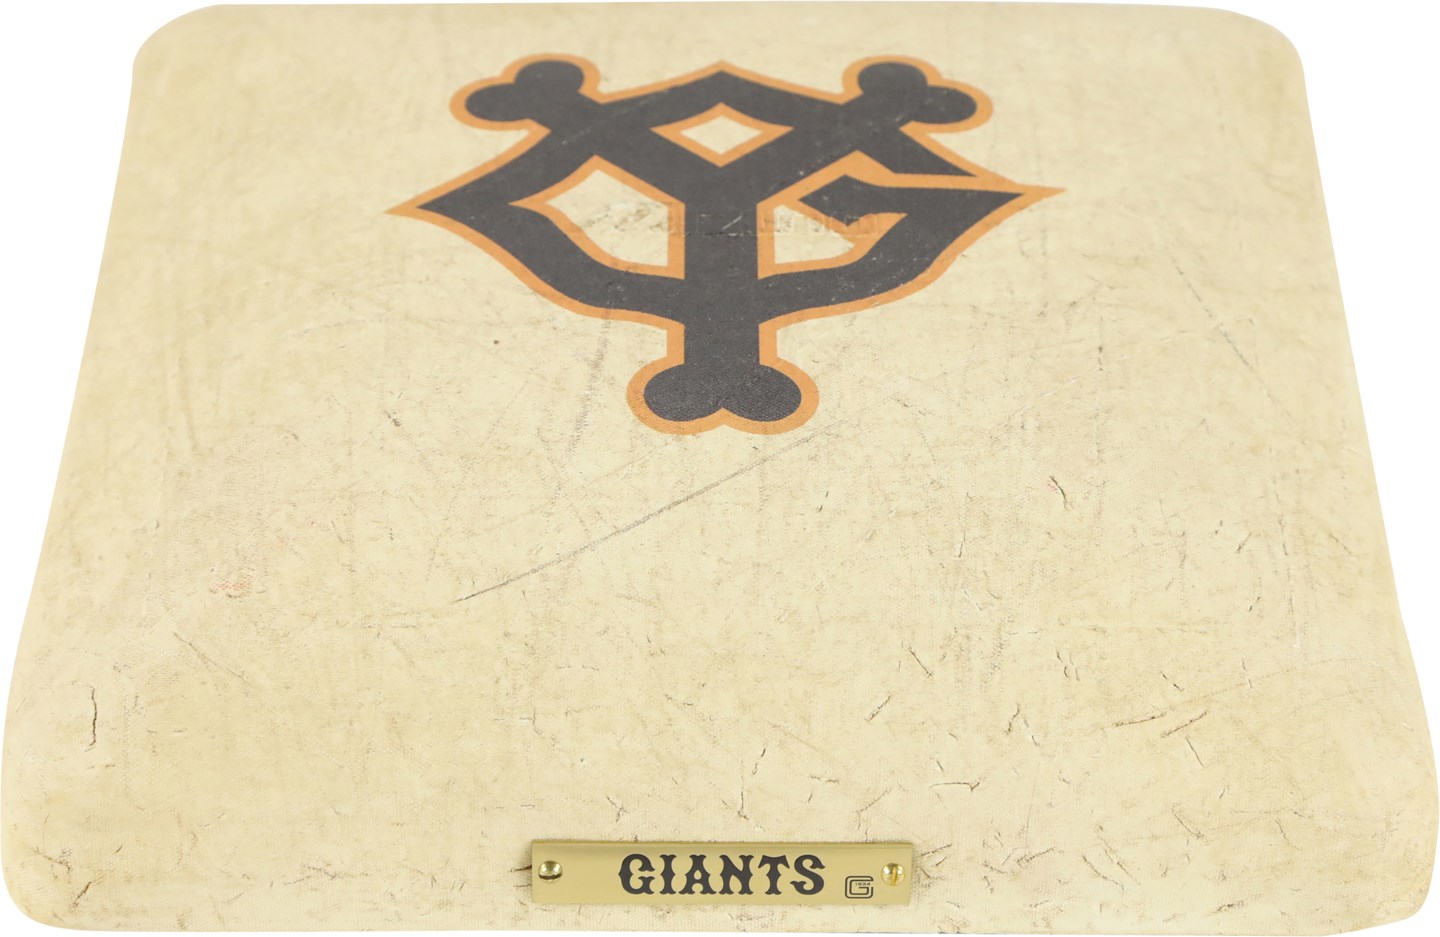 - 2015 Yomiuri Giants Game Used Tokyo Dome Base (1 of Only 7 Sold)